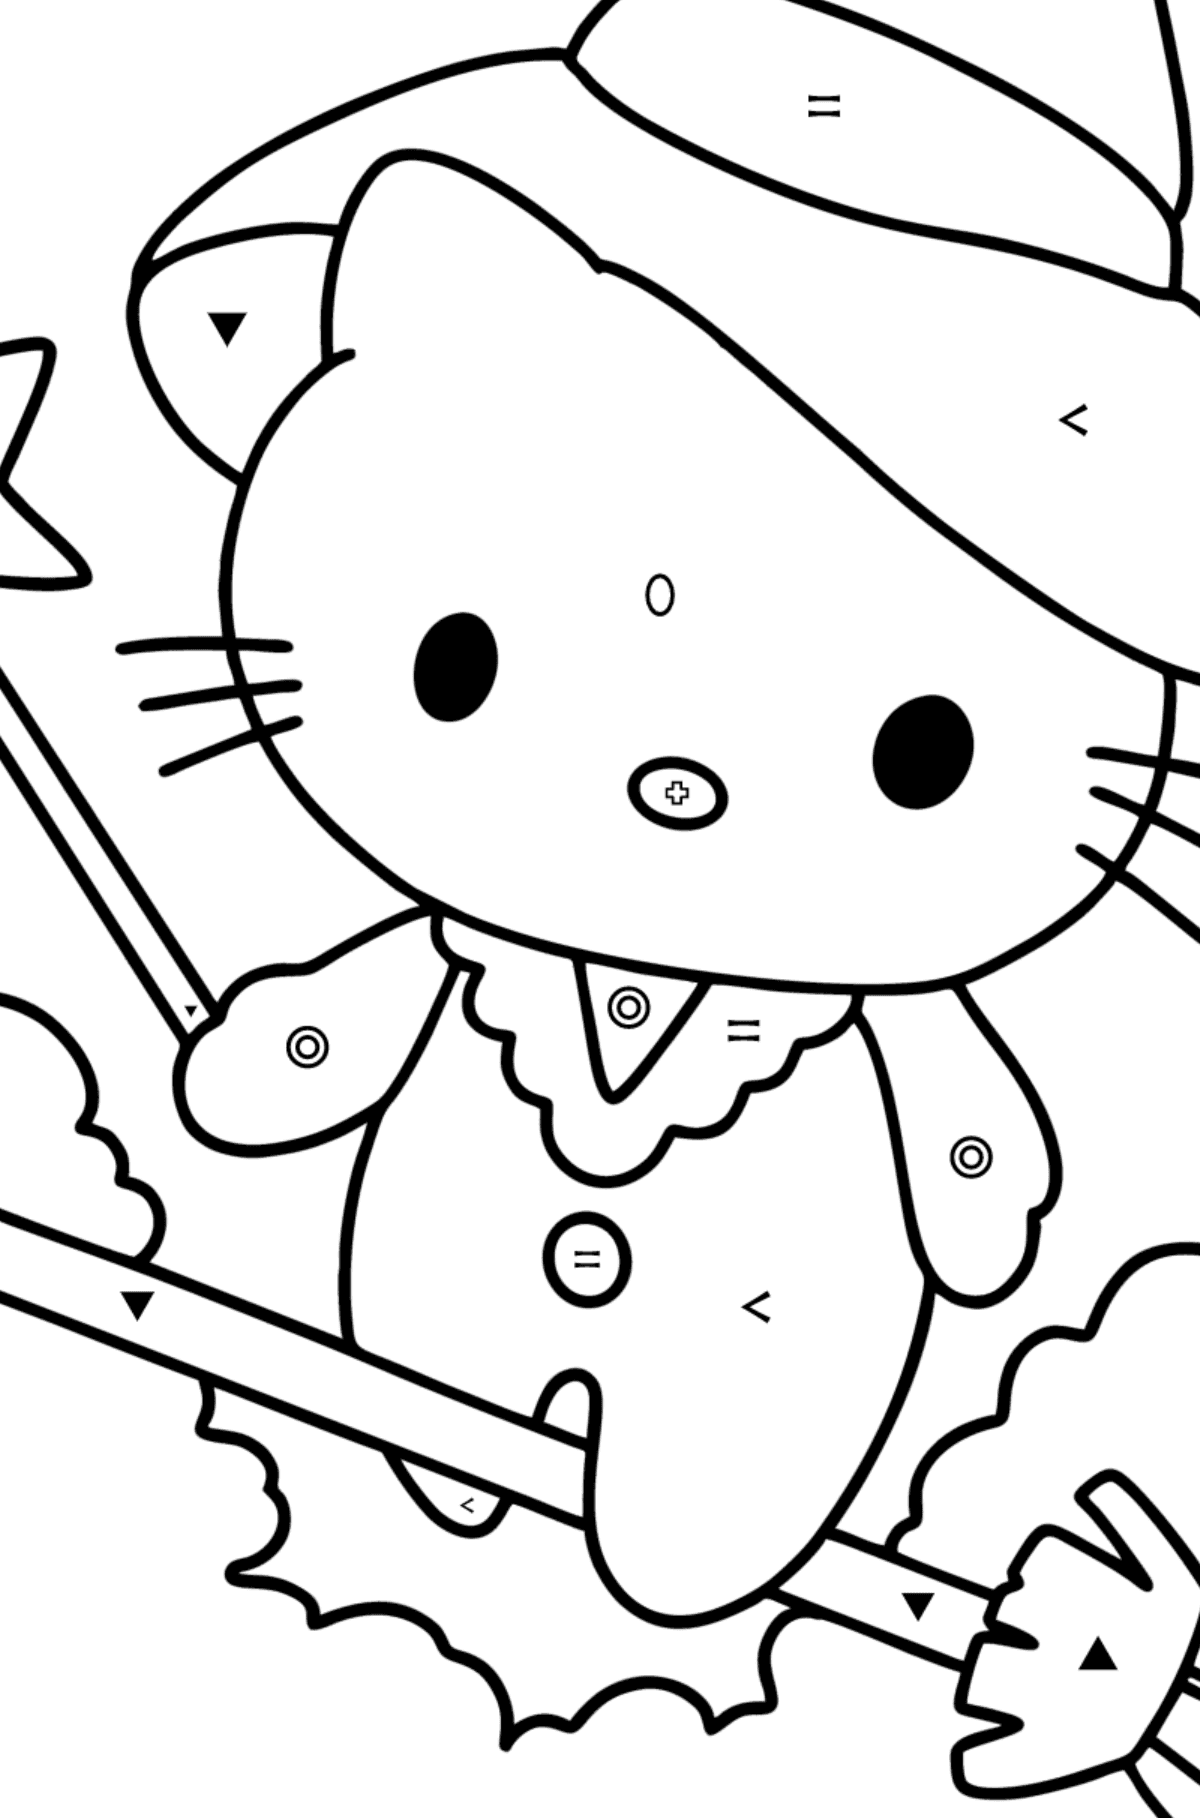 Hello Kitty Halloween coloring page - Coloring by Symbols and Geometric Shapes for Kids